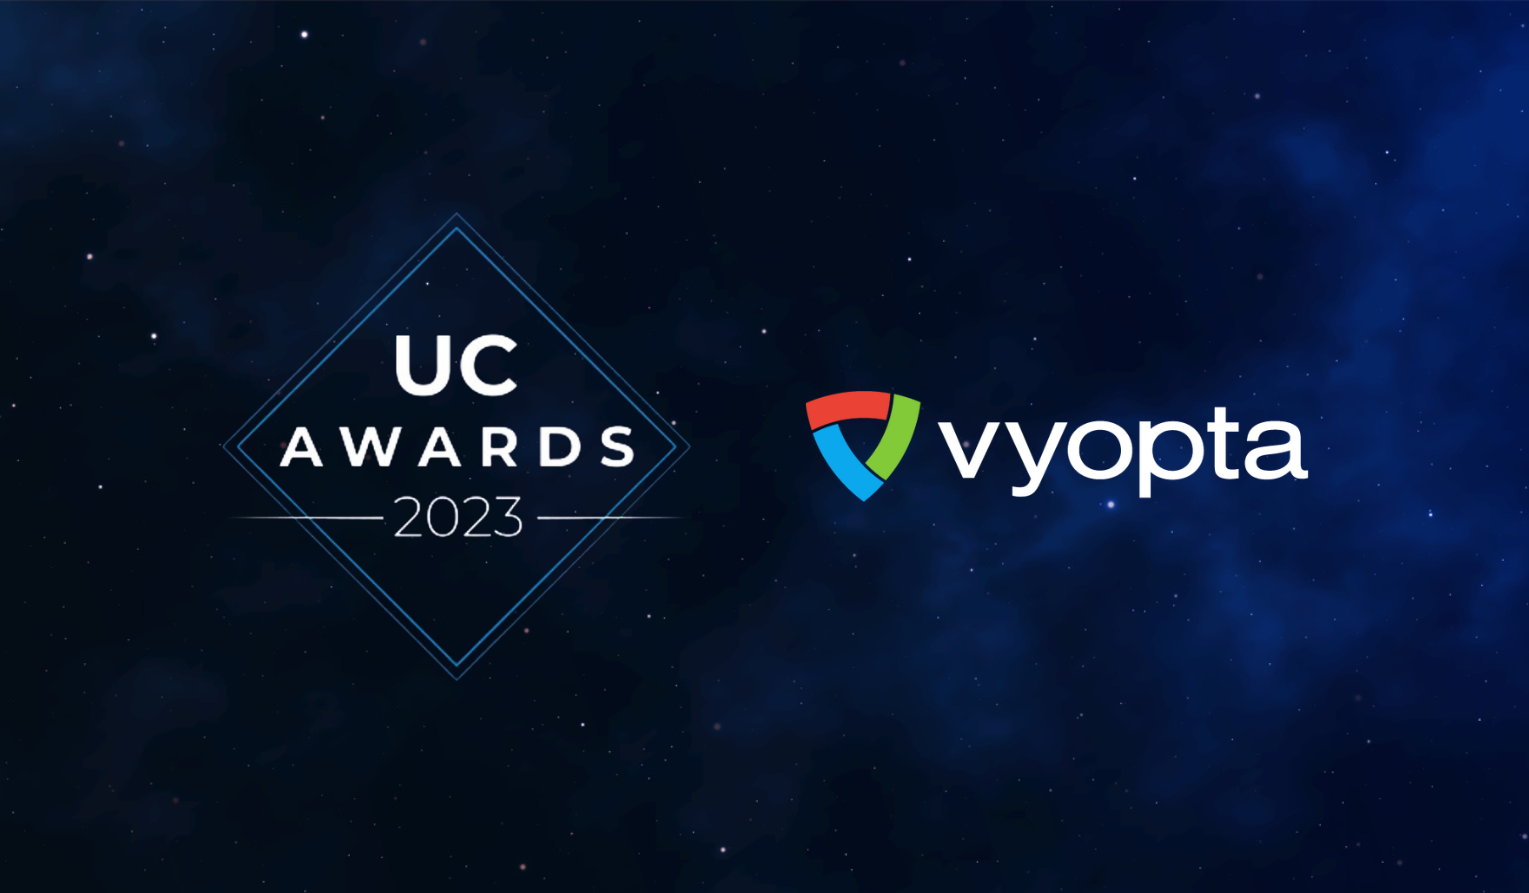 Vyopta Named a Finalist in UC Today’s UC Awards for Best Service Management Platform